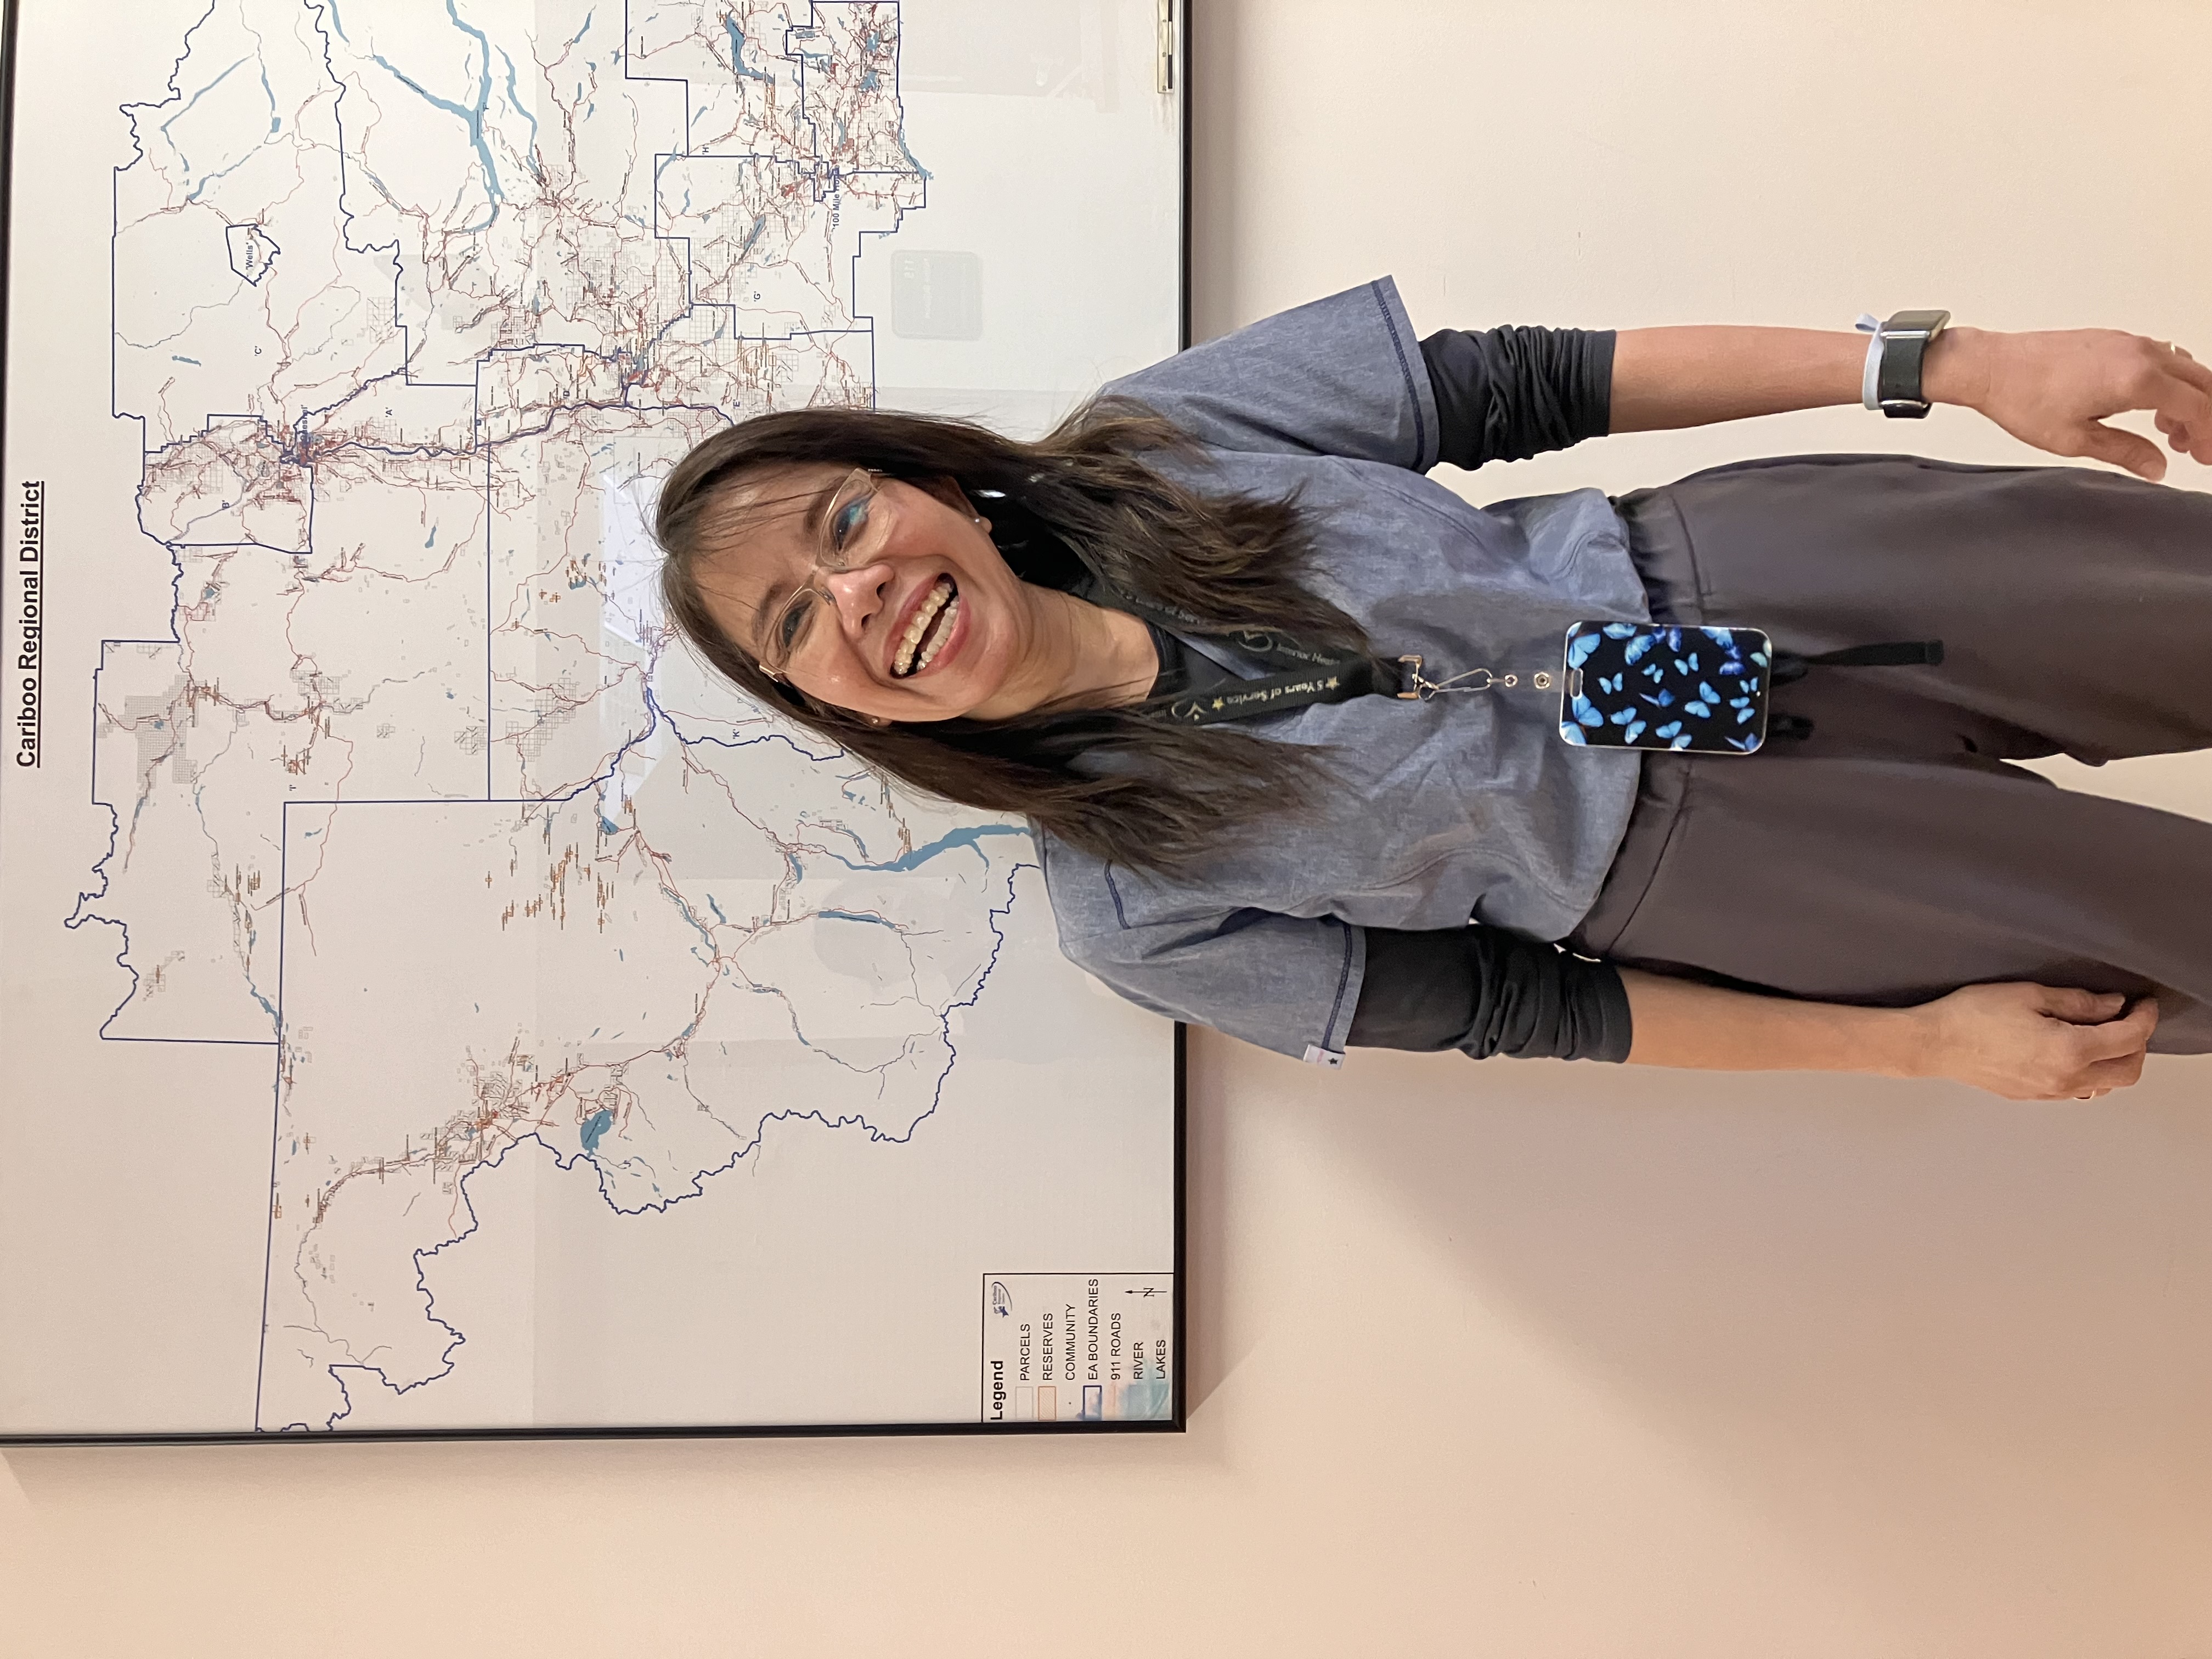 A smiling woman with long dark hair and glasses and grey medical clothes smiles in front of a map in an office